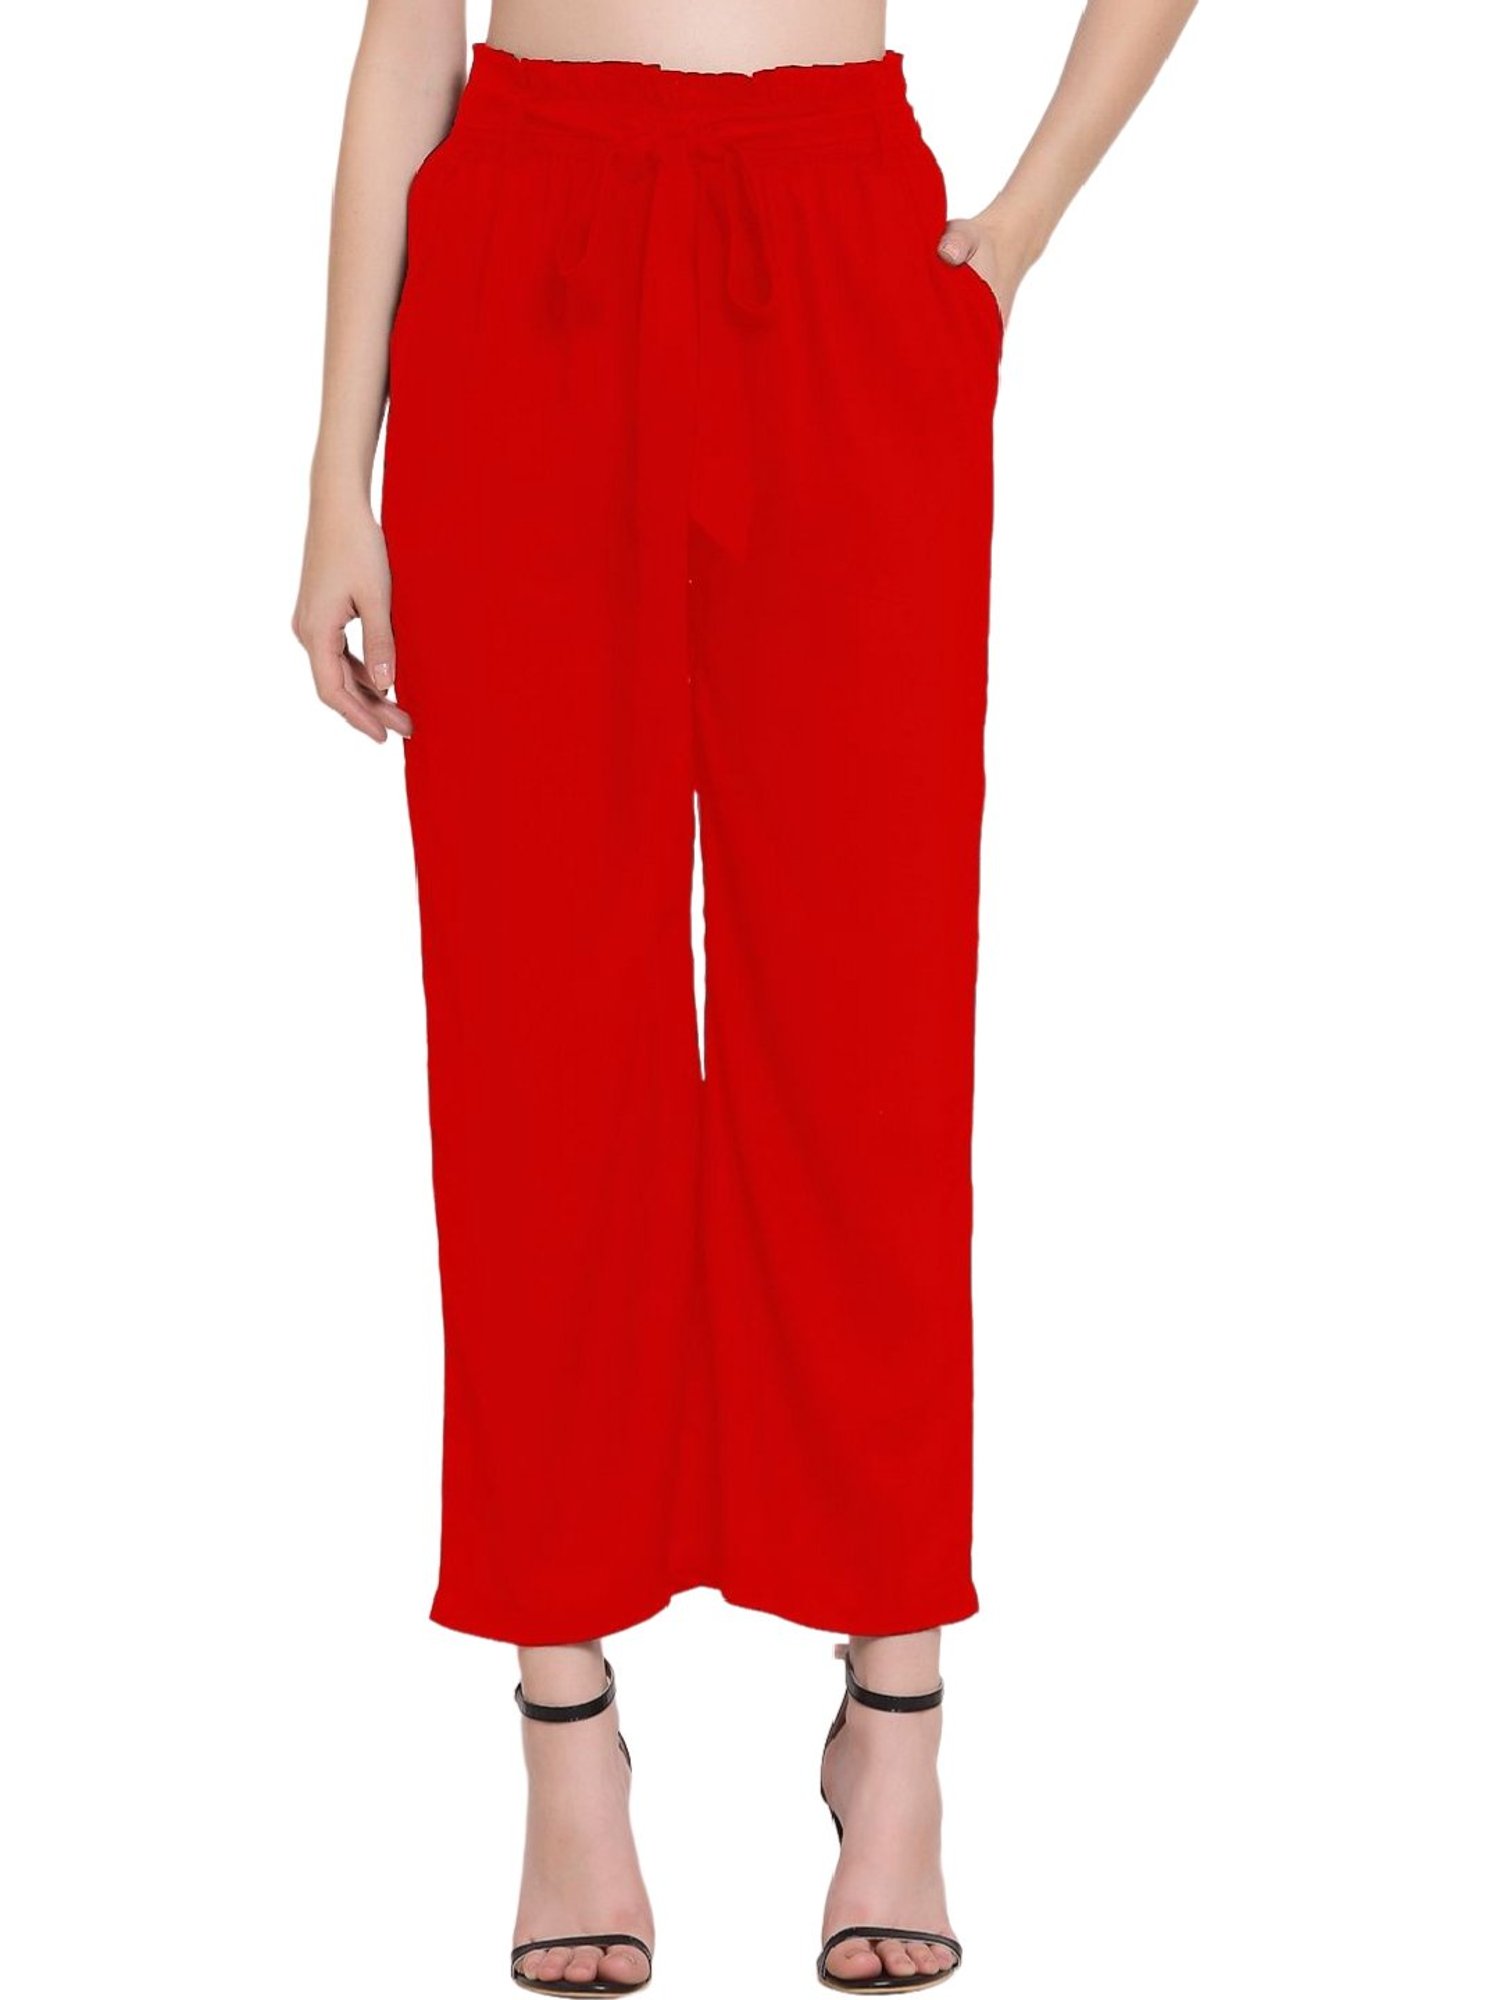 Chic Wine Red Trousers  Paperbag Waist Pants  Red Office Pants  Lulus